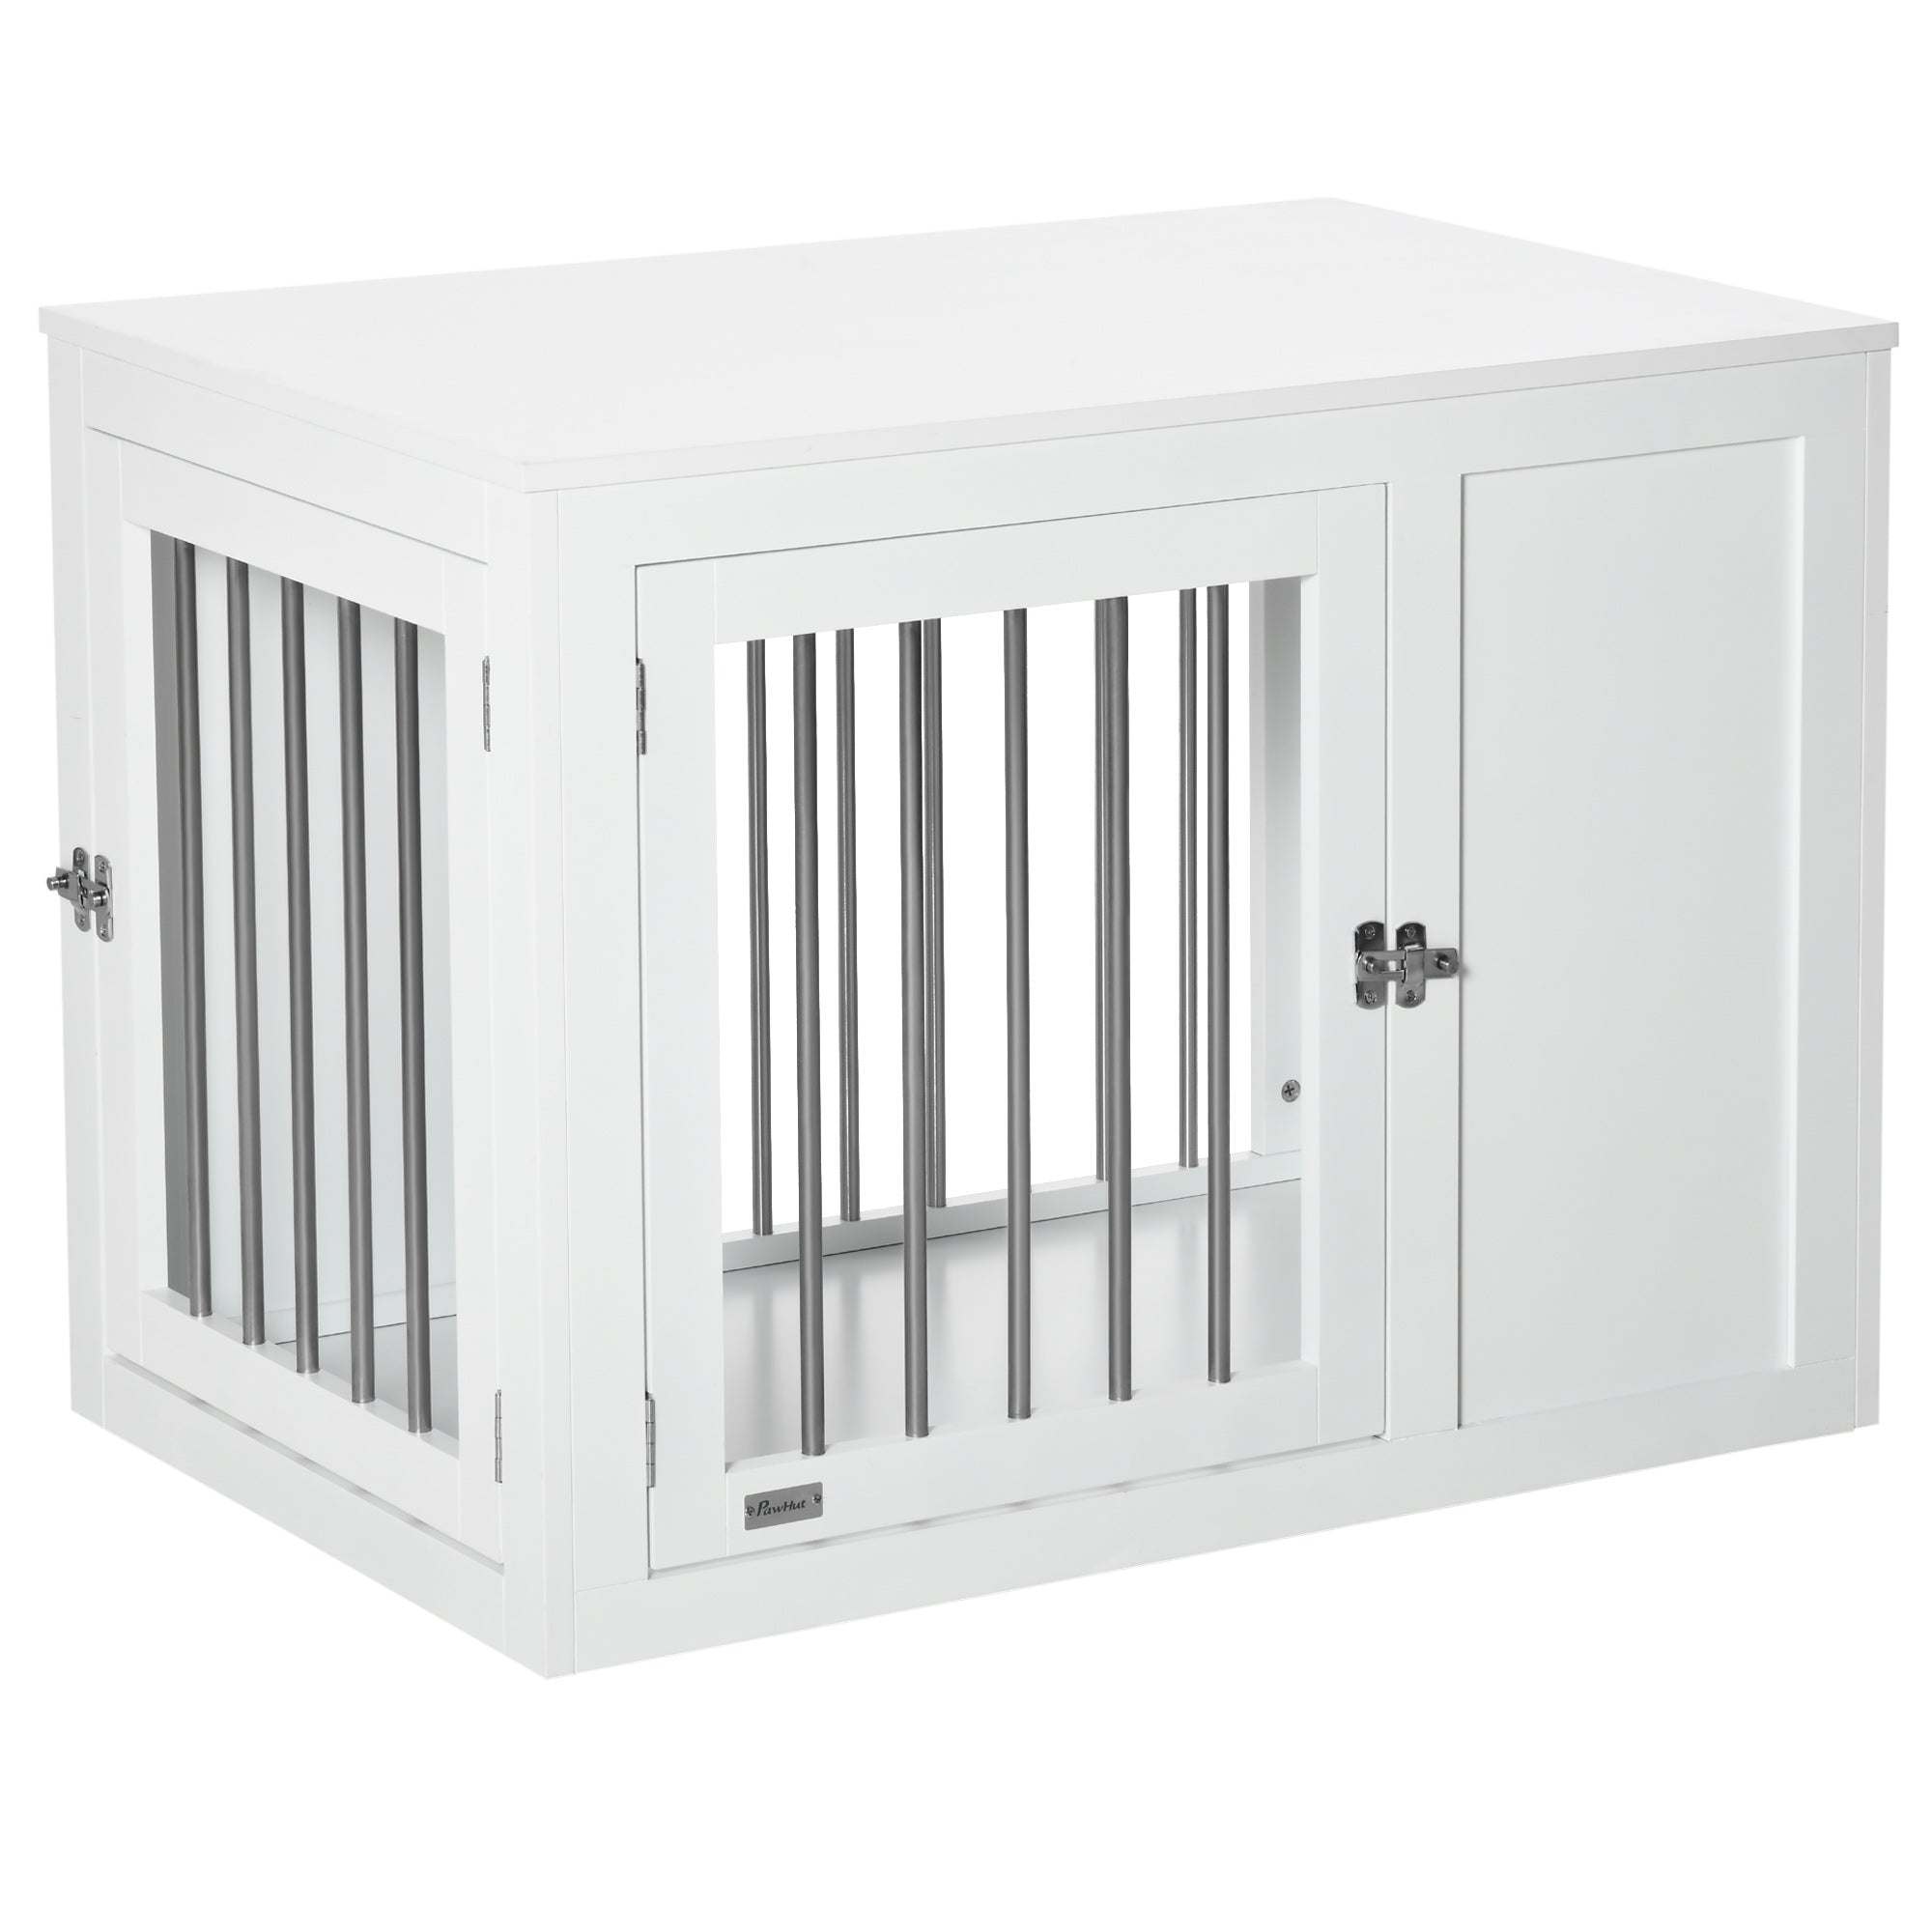 PawHut Furniture-Style Dog Crate End Table w/ 2 Doors - for Medium Dogs  | TJ Hughes